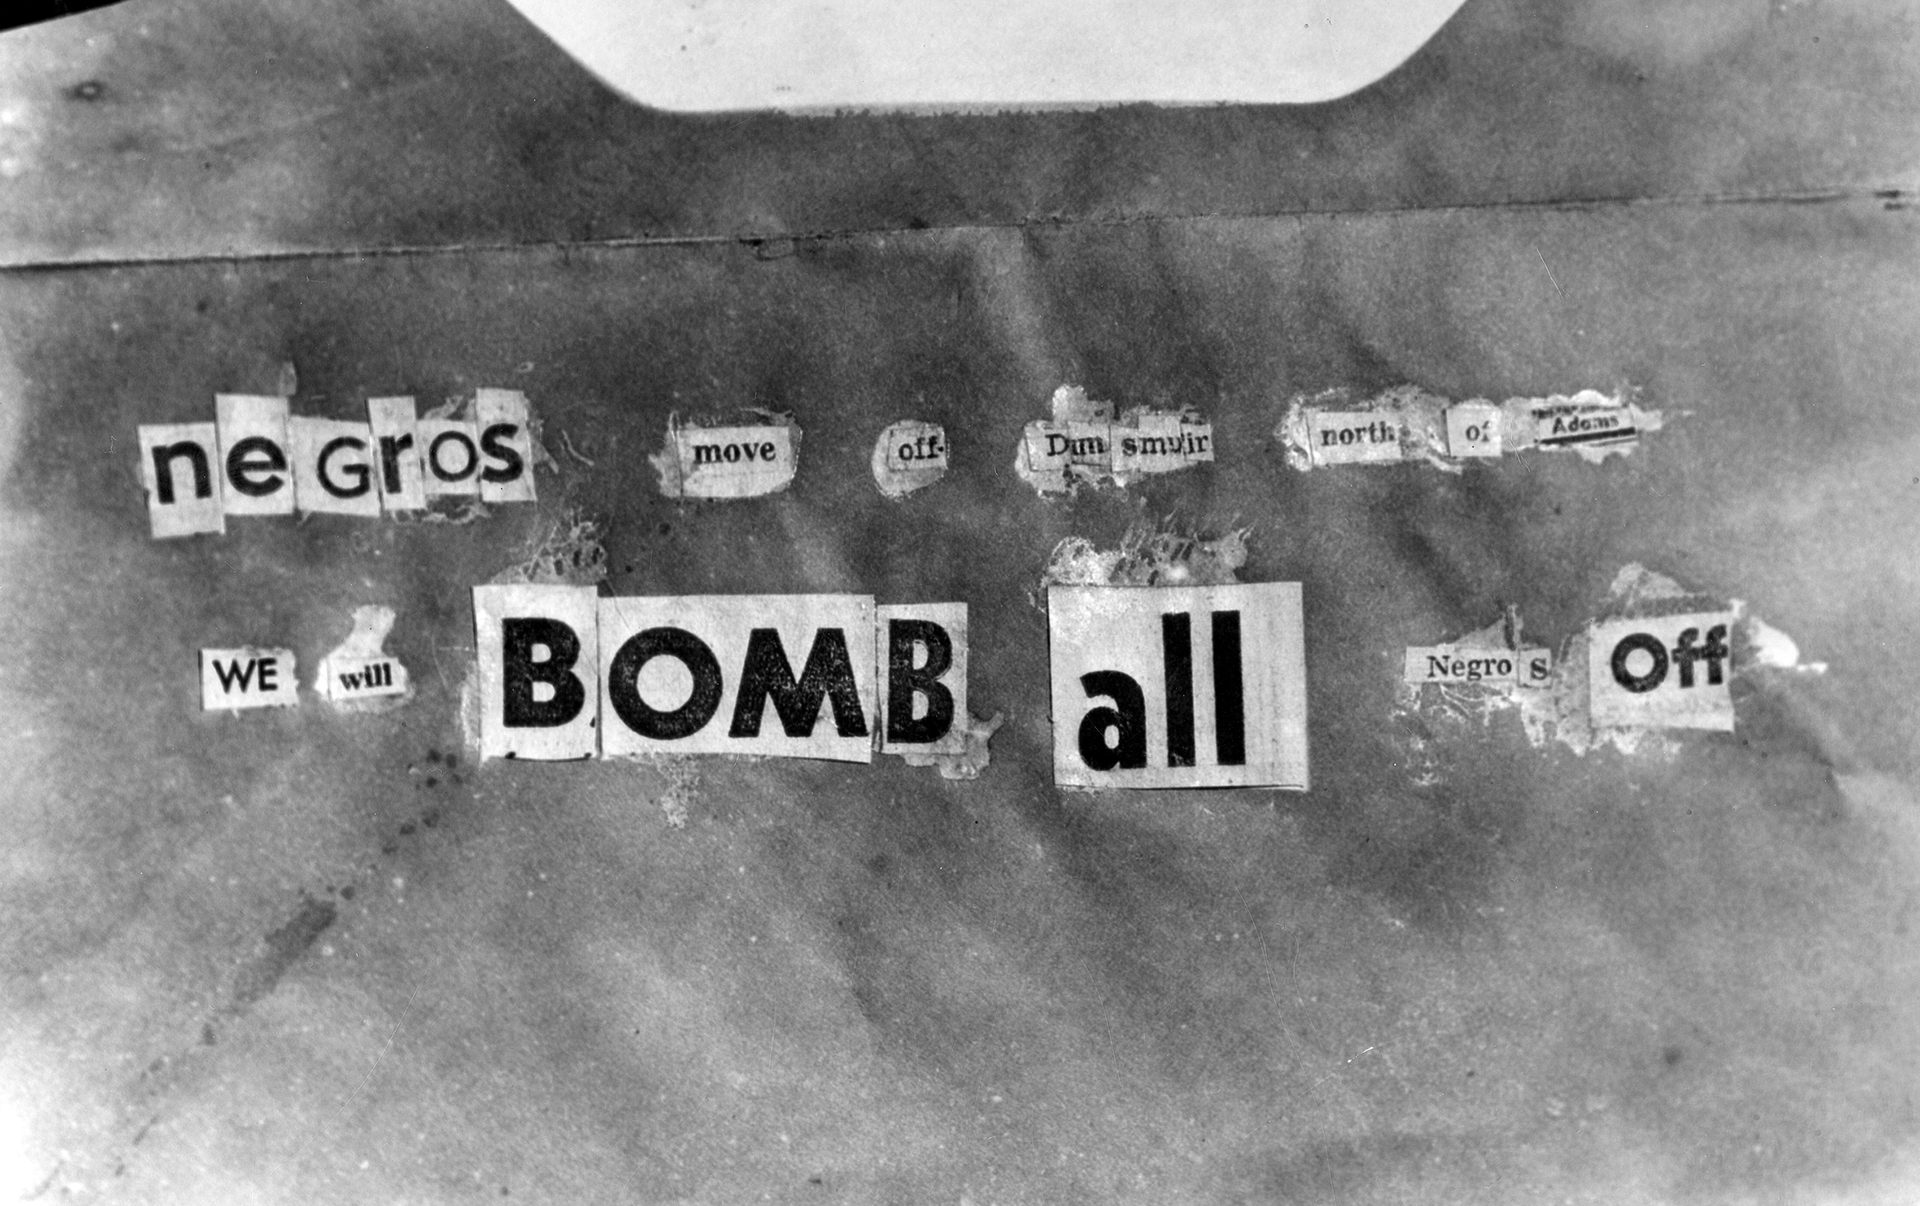 Photograph of bomb threat found at William Bailey's house in Los Angeles, taken in March 1952.